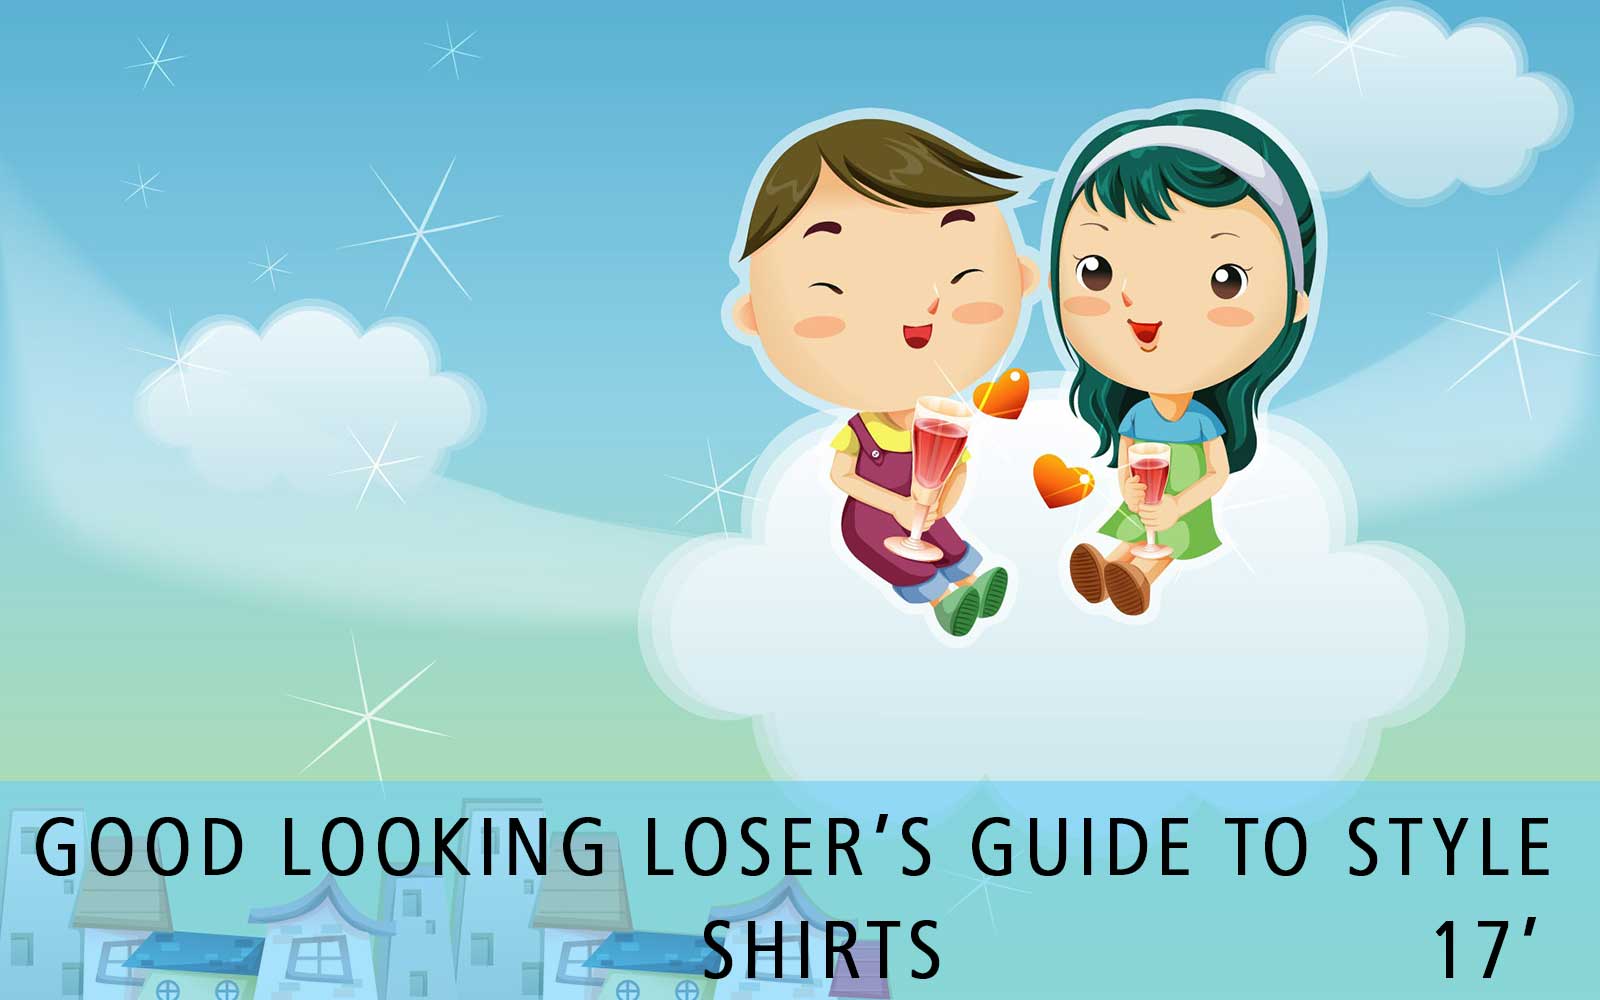 Good Looking Loser's Summer 2017 Guide to Style (Shirts)